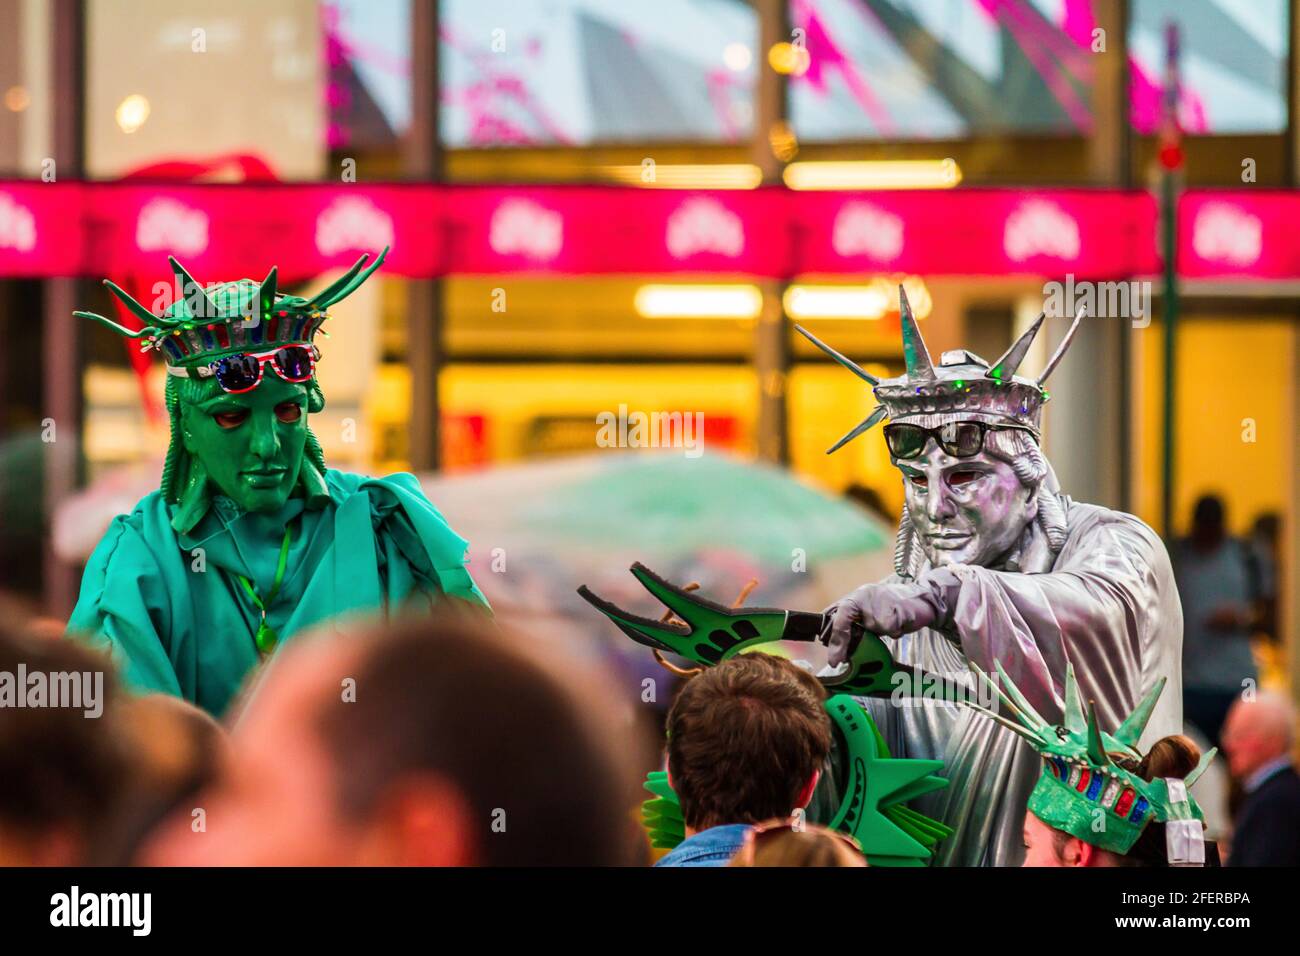 Two men performing in Statue of Liberty costume at Times Square Stock Photo